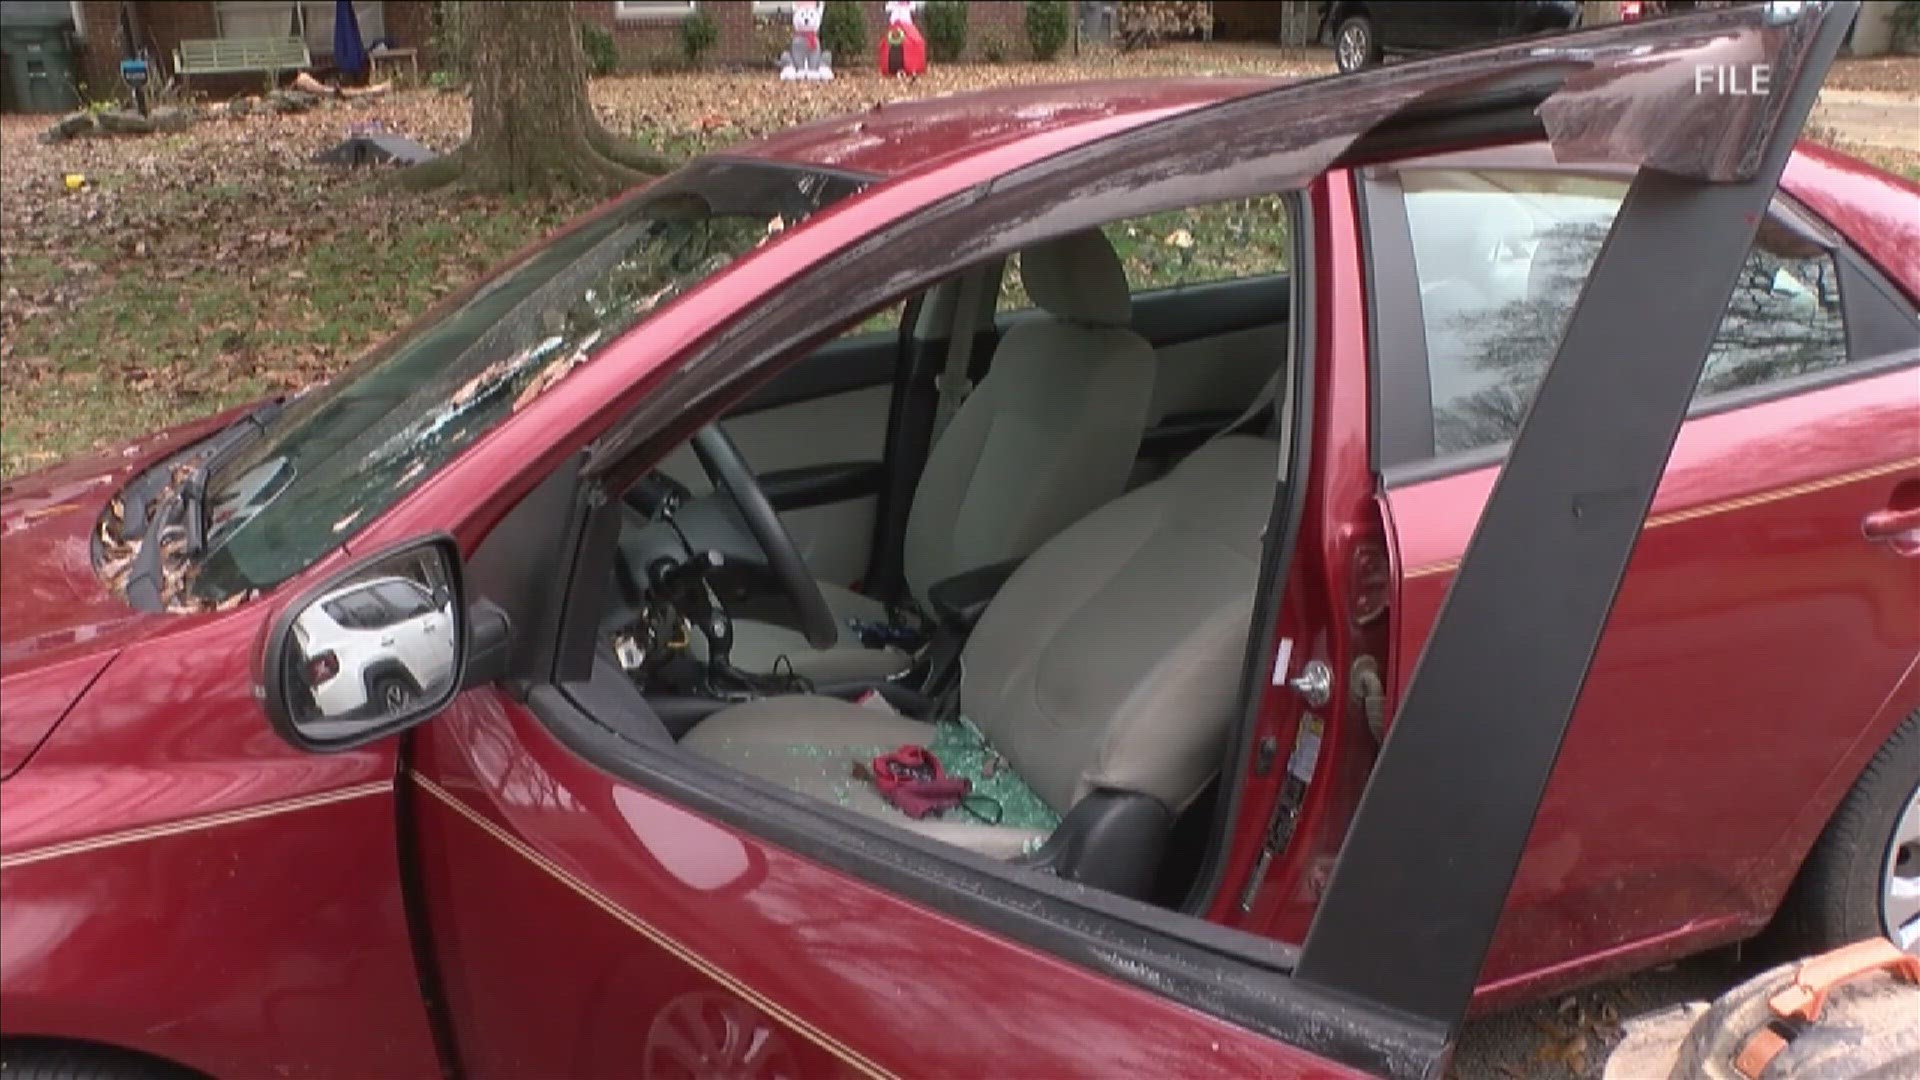 One Memphian, Justin, said he’s spent between $30,000 to $40,000 in car replacements over the last year.